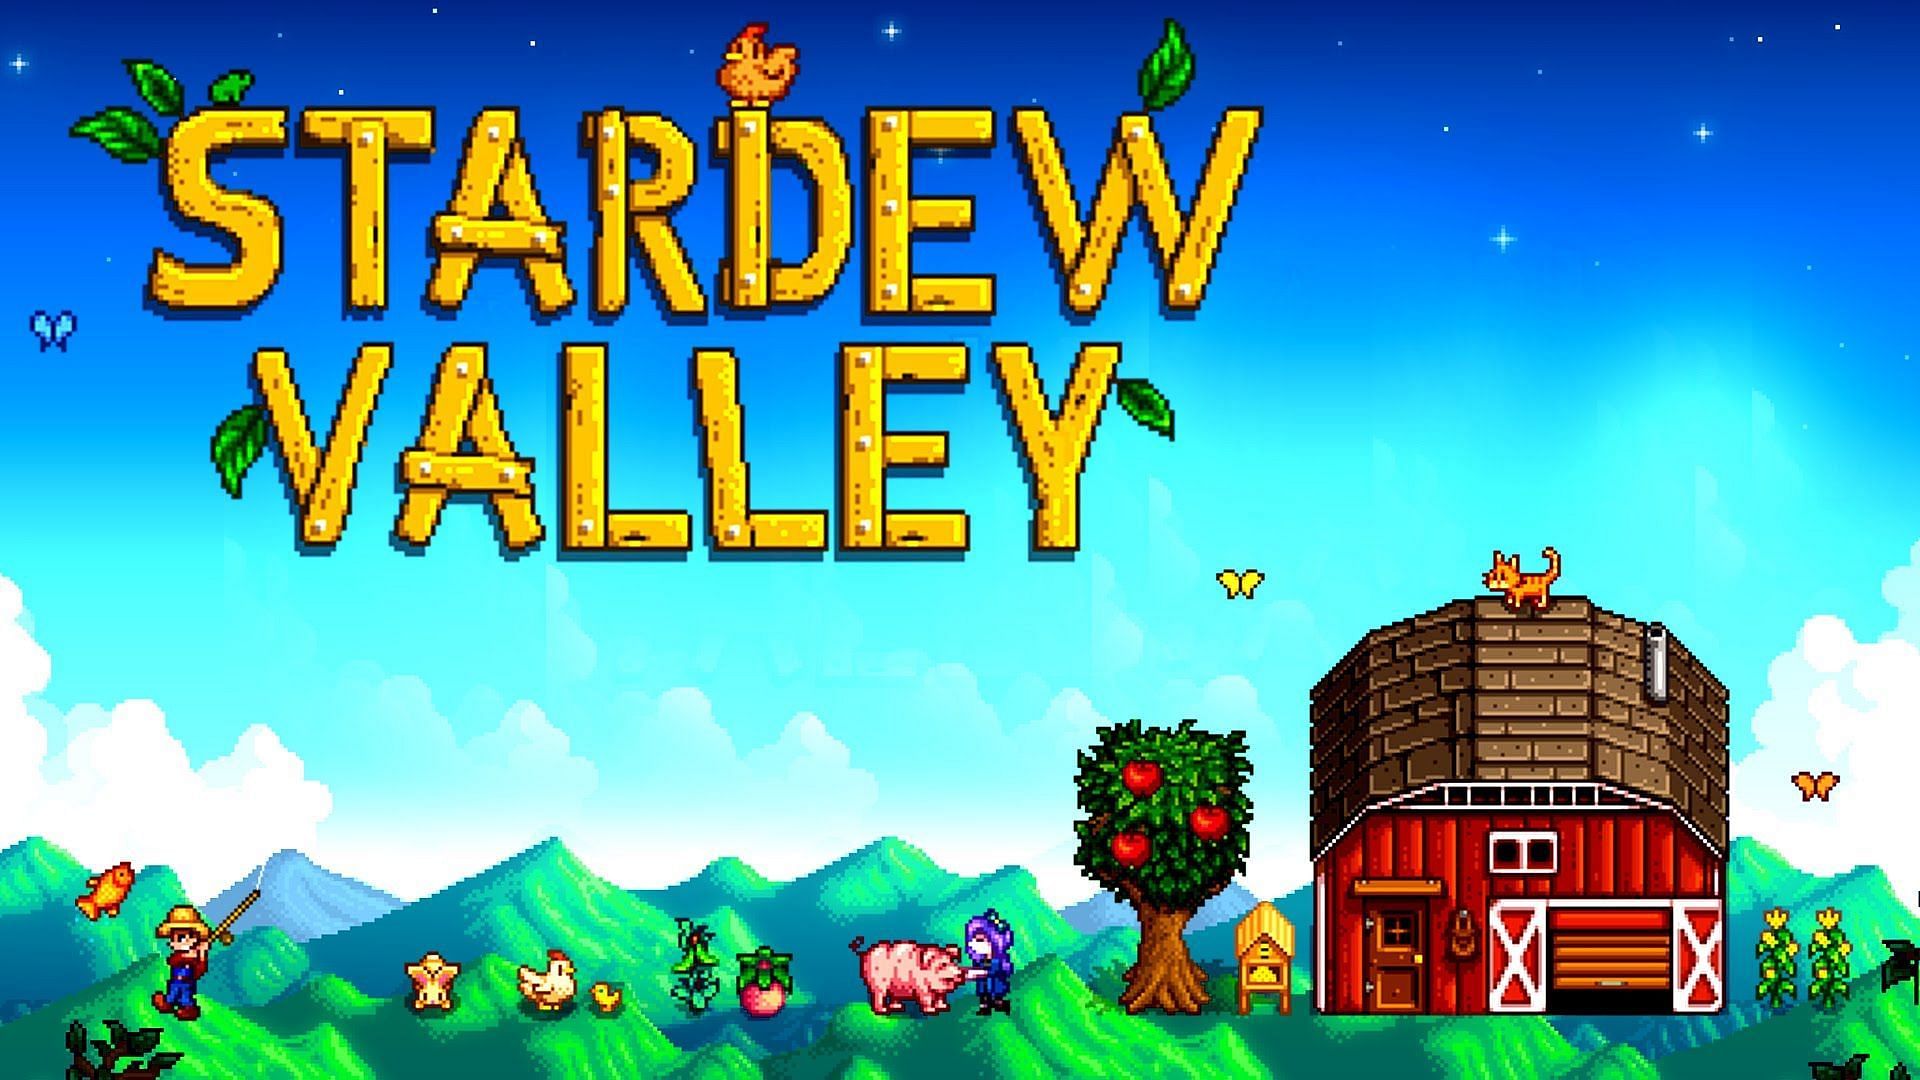 Stardew Valley release date and more features on Apple Arcade (Image via Stardewvalley.net)